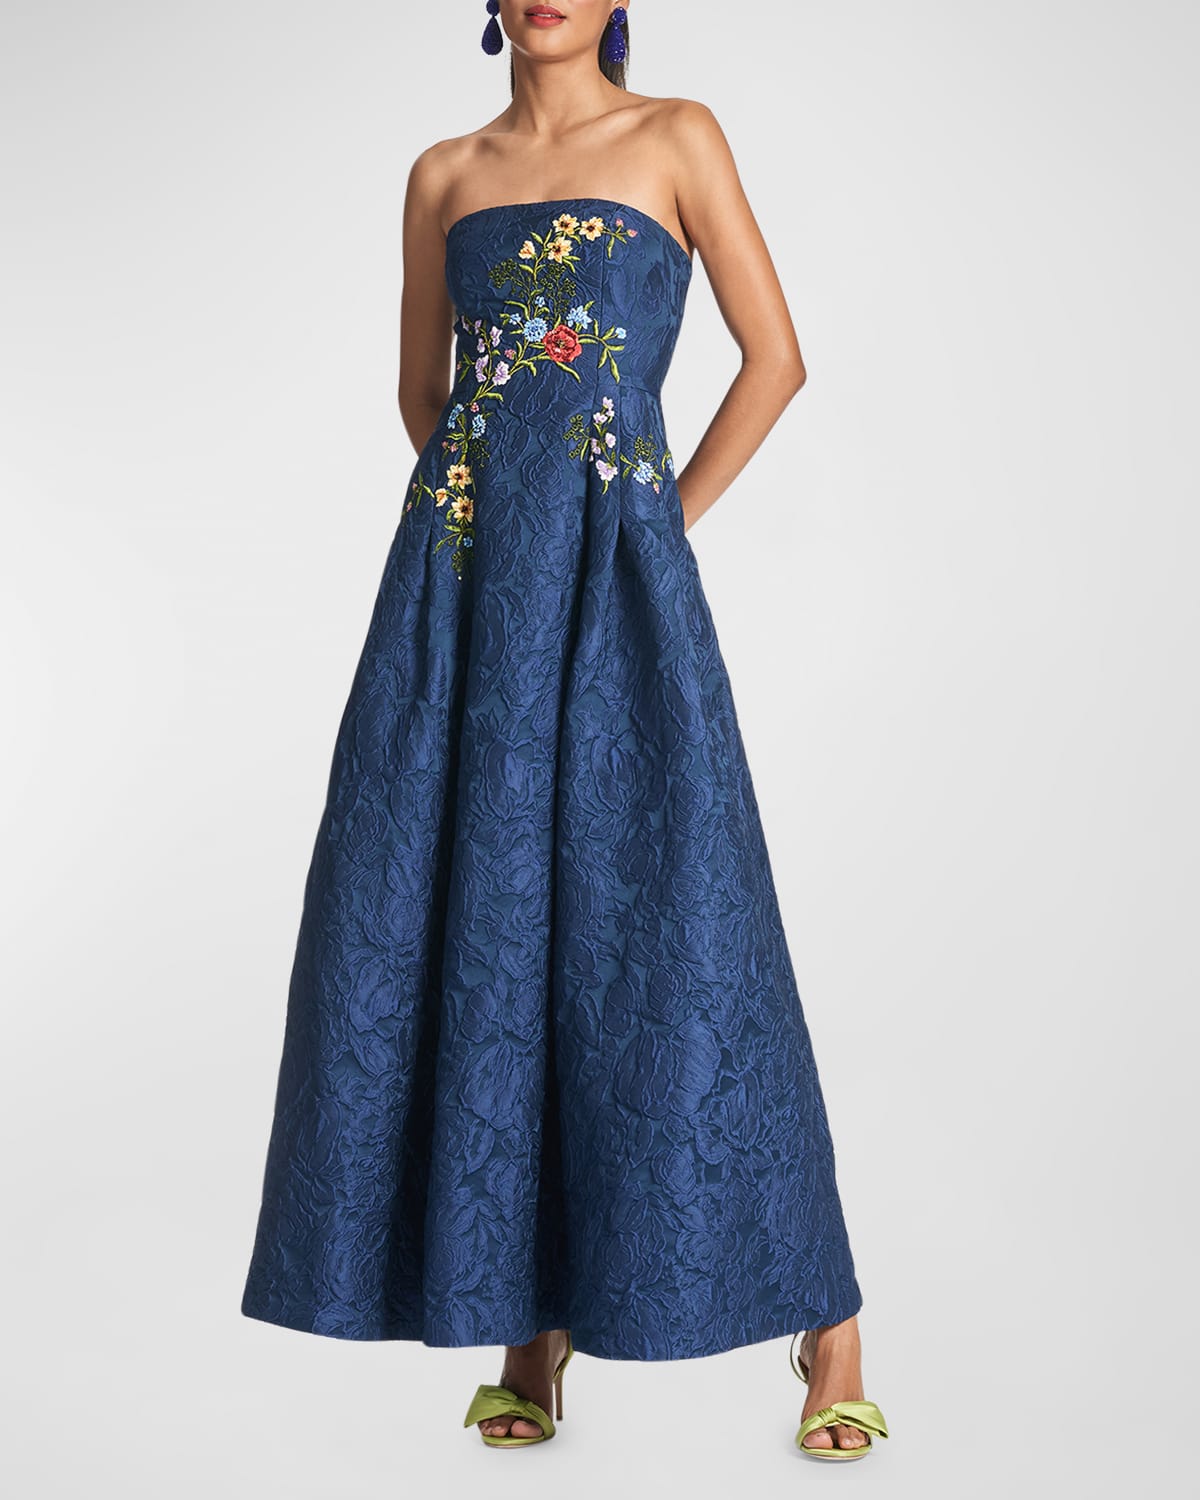 SACHIN & BABI BELLE STRAPLESS FLORAL-EMBROIDERED A-LINE GOWN